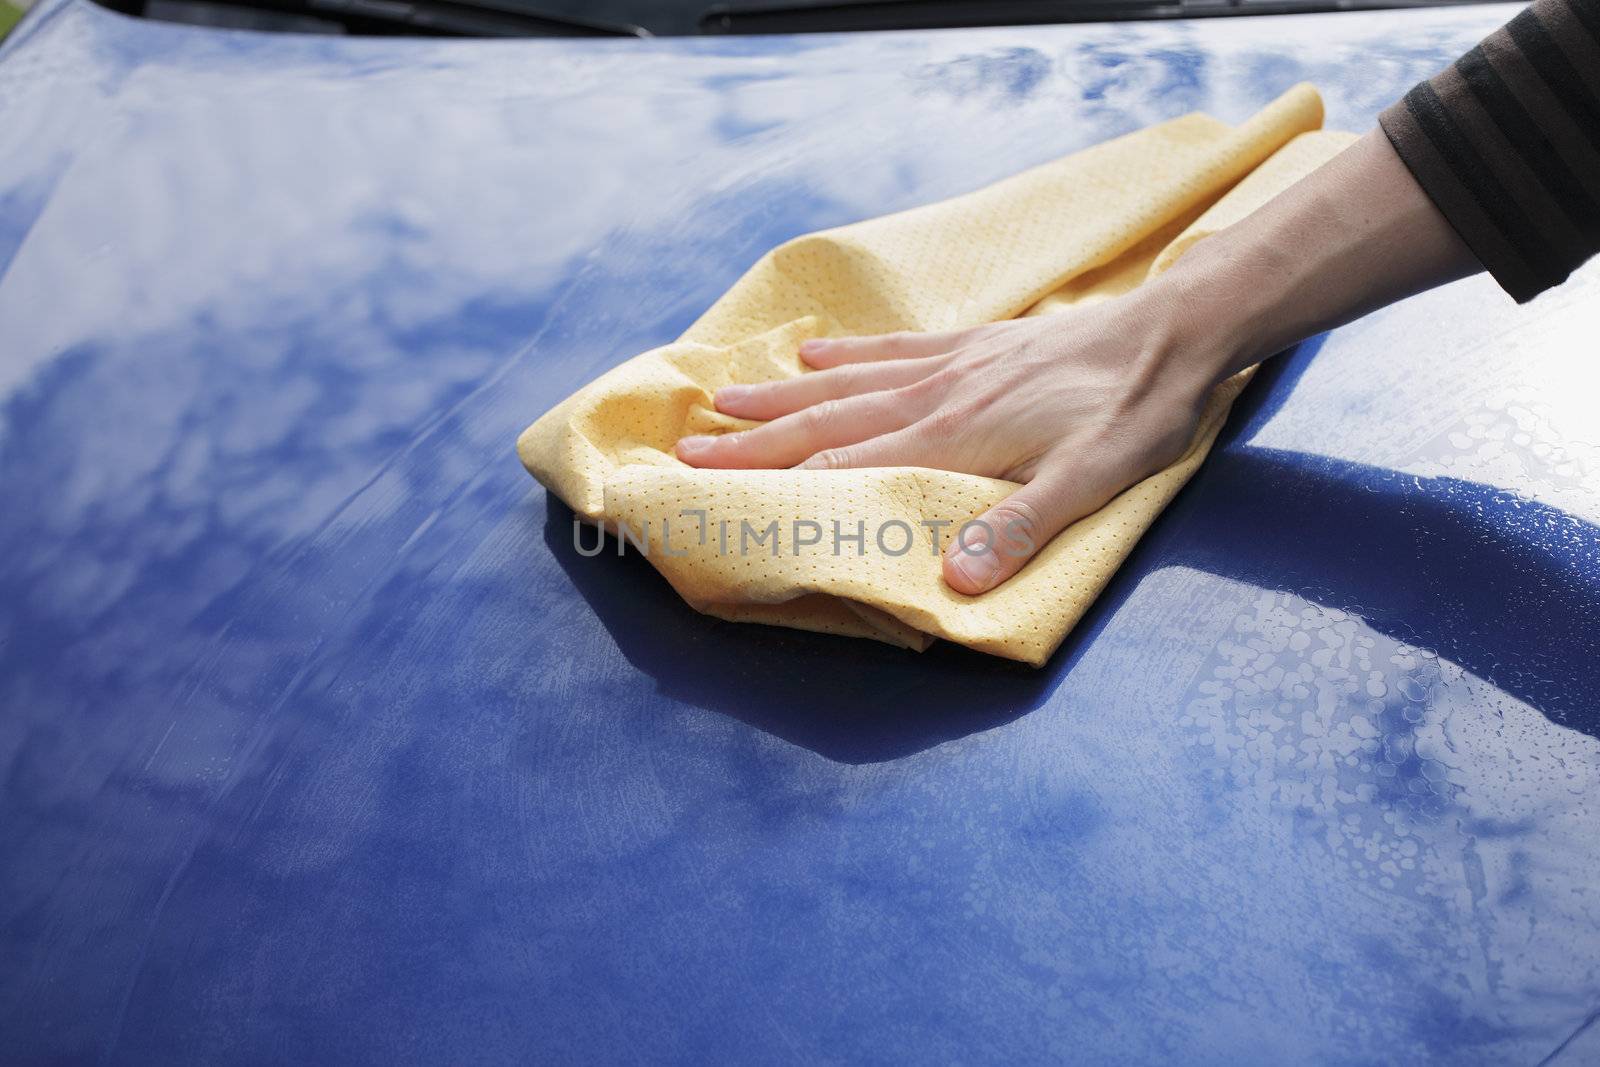 Drying car by Stocksnapper